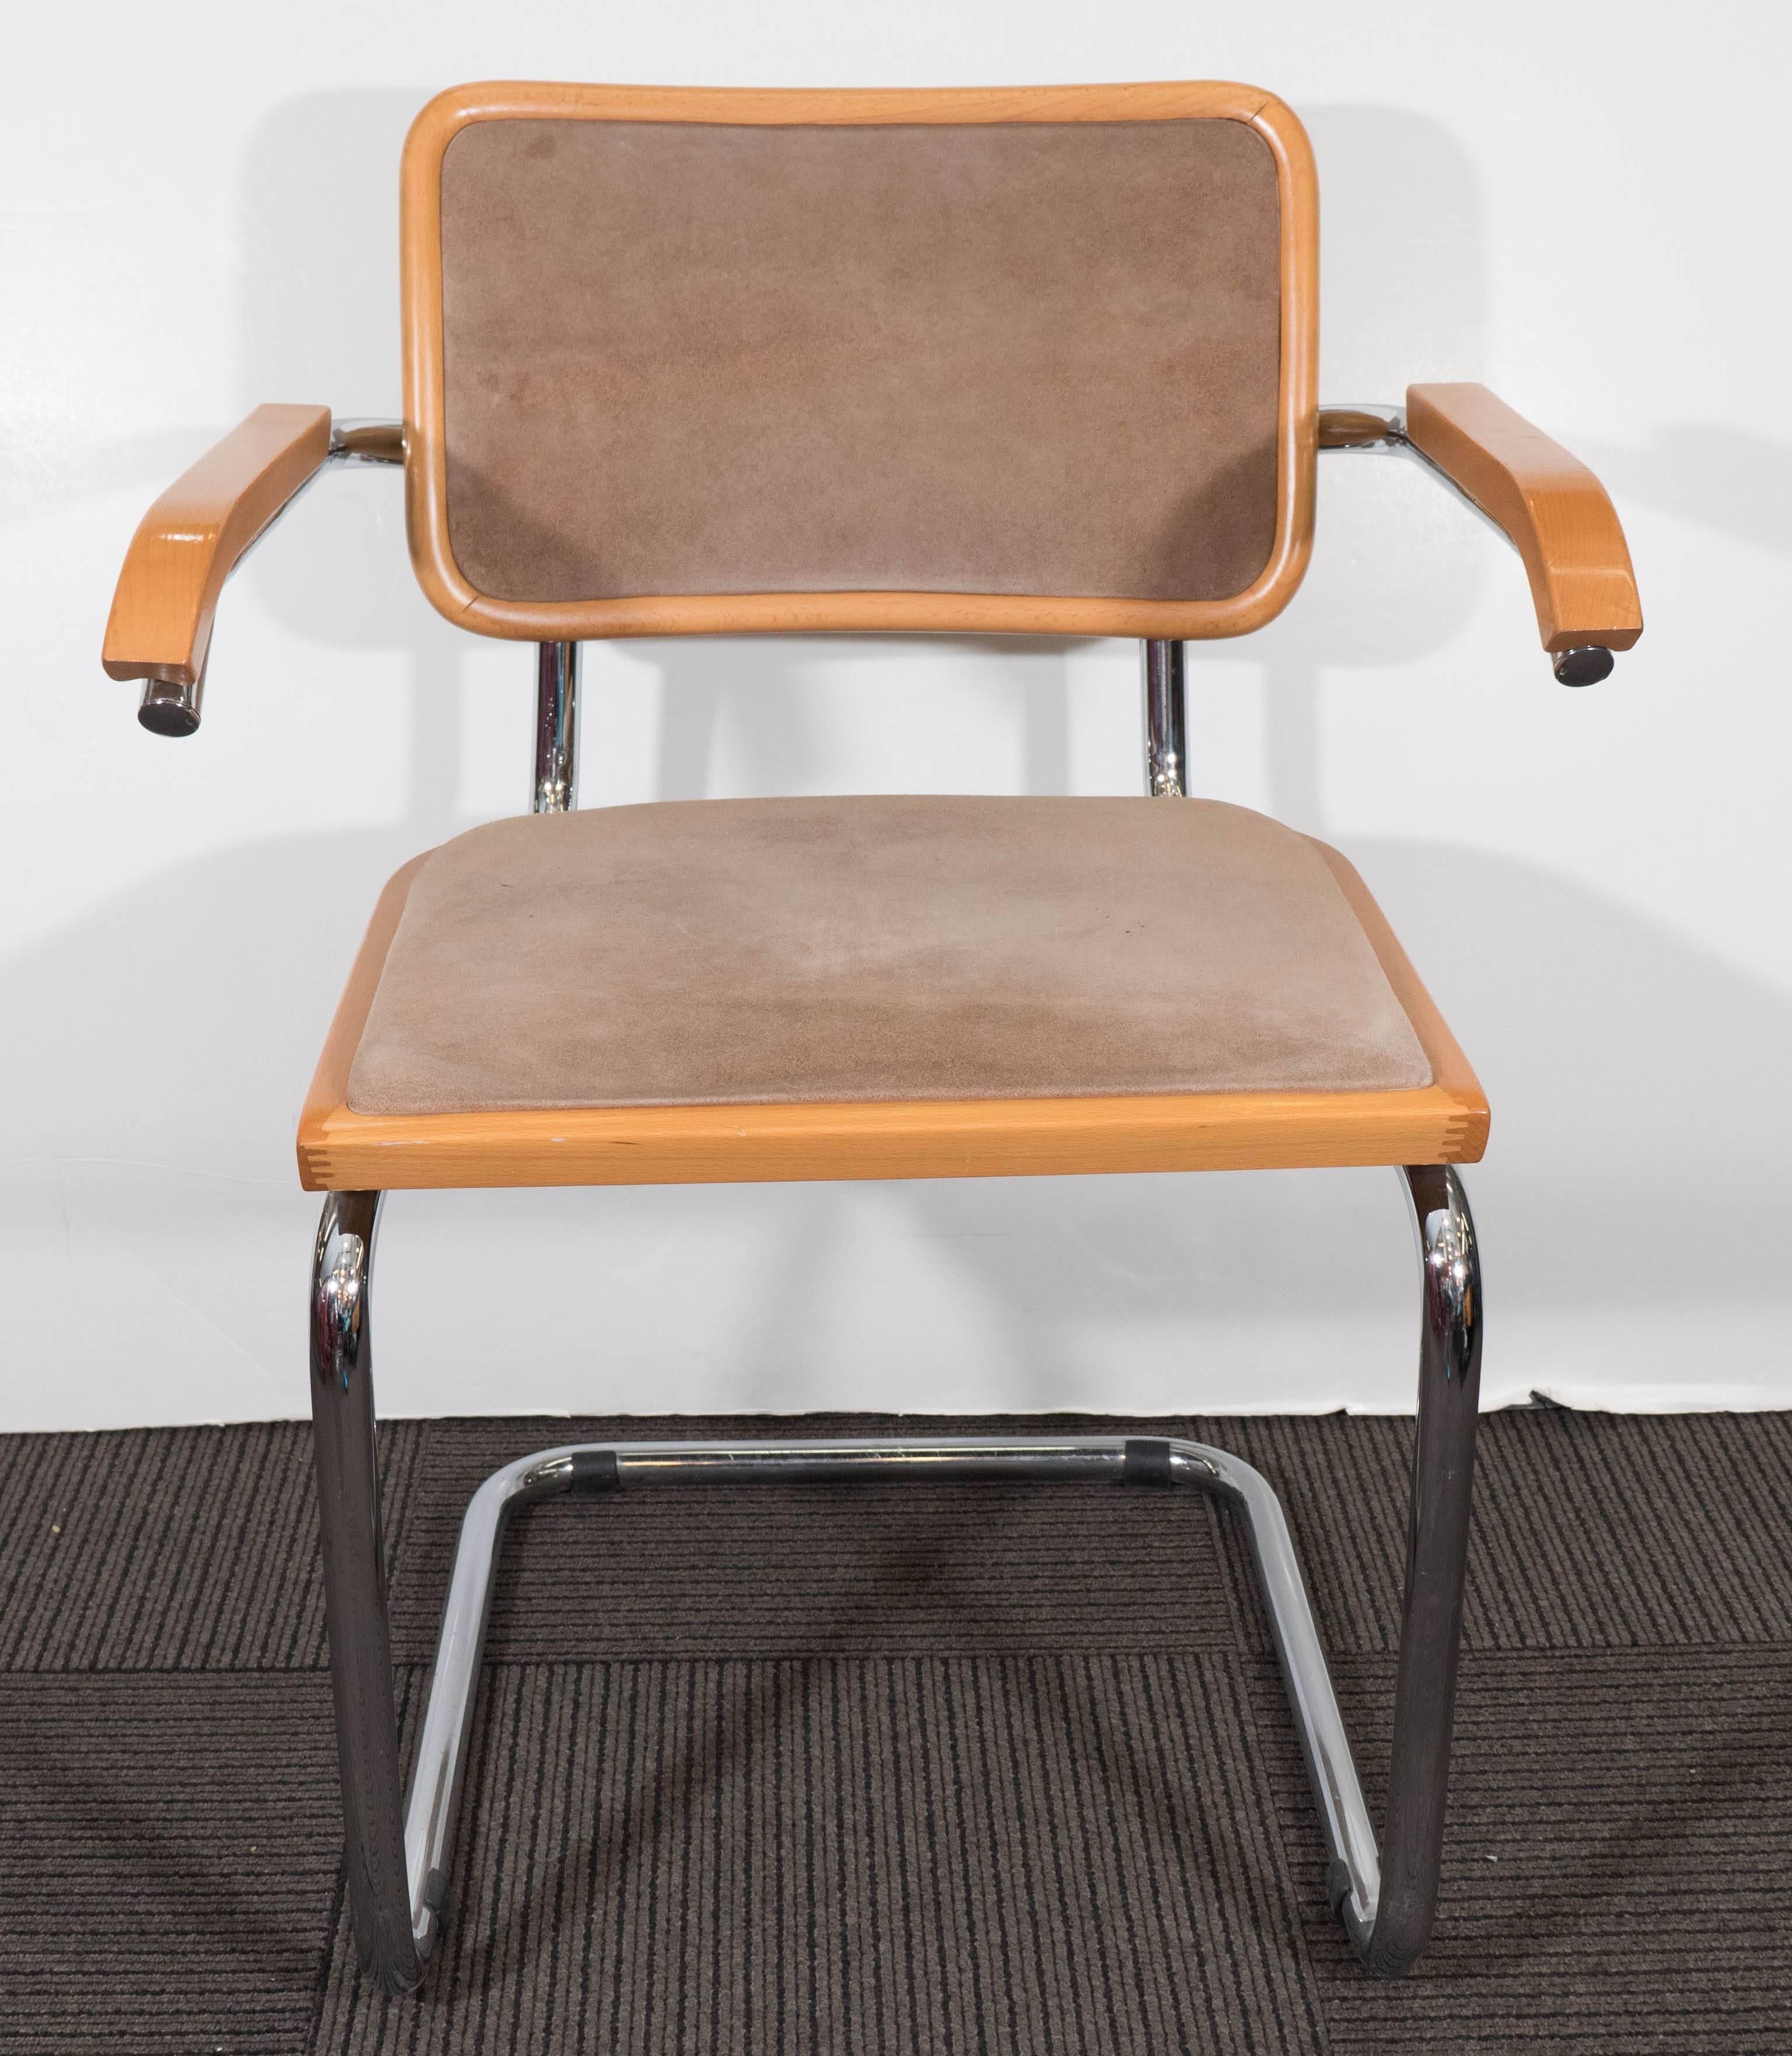 This vintage armchair, produced in Italy circa 1970s, is based on the Bauhaus style 'Cesca Chair', originally designed by Marcel Breuer in 1928. This version includes suede upholstered seat and back in taupe, and lacquered warm beech wood frame and